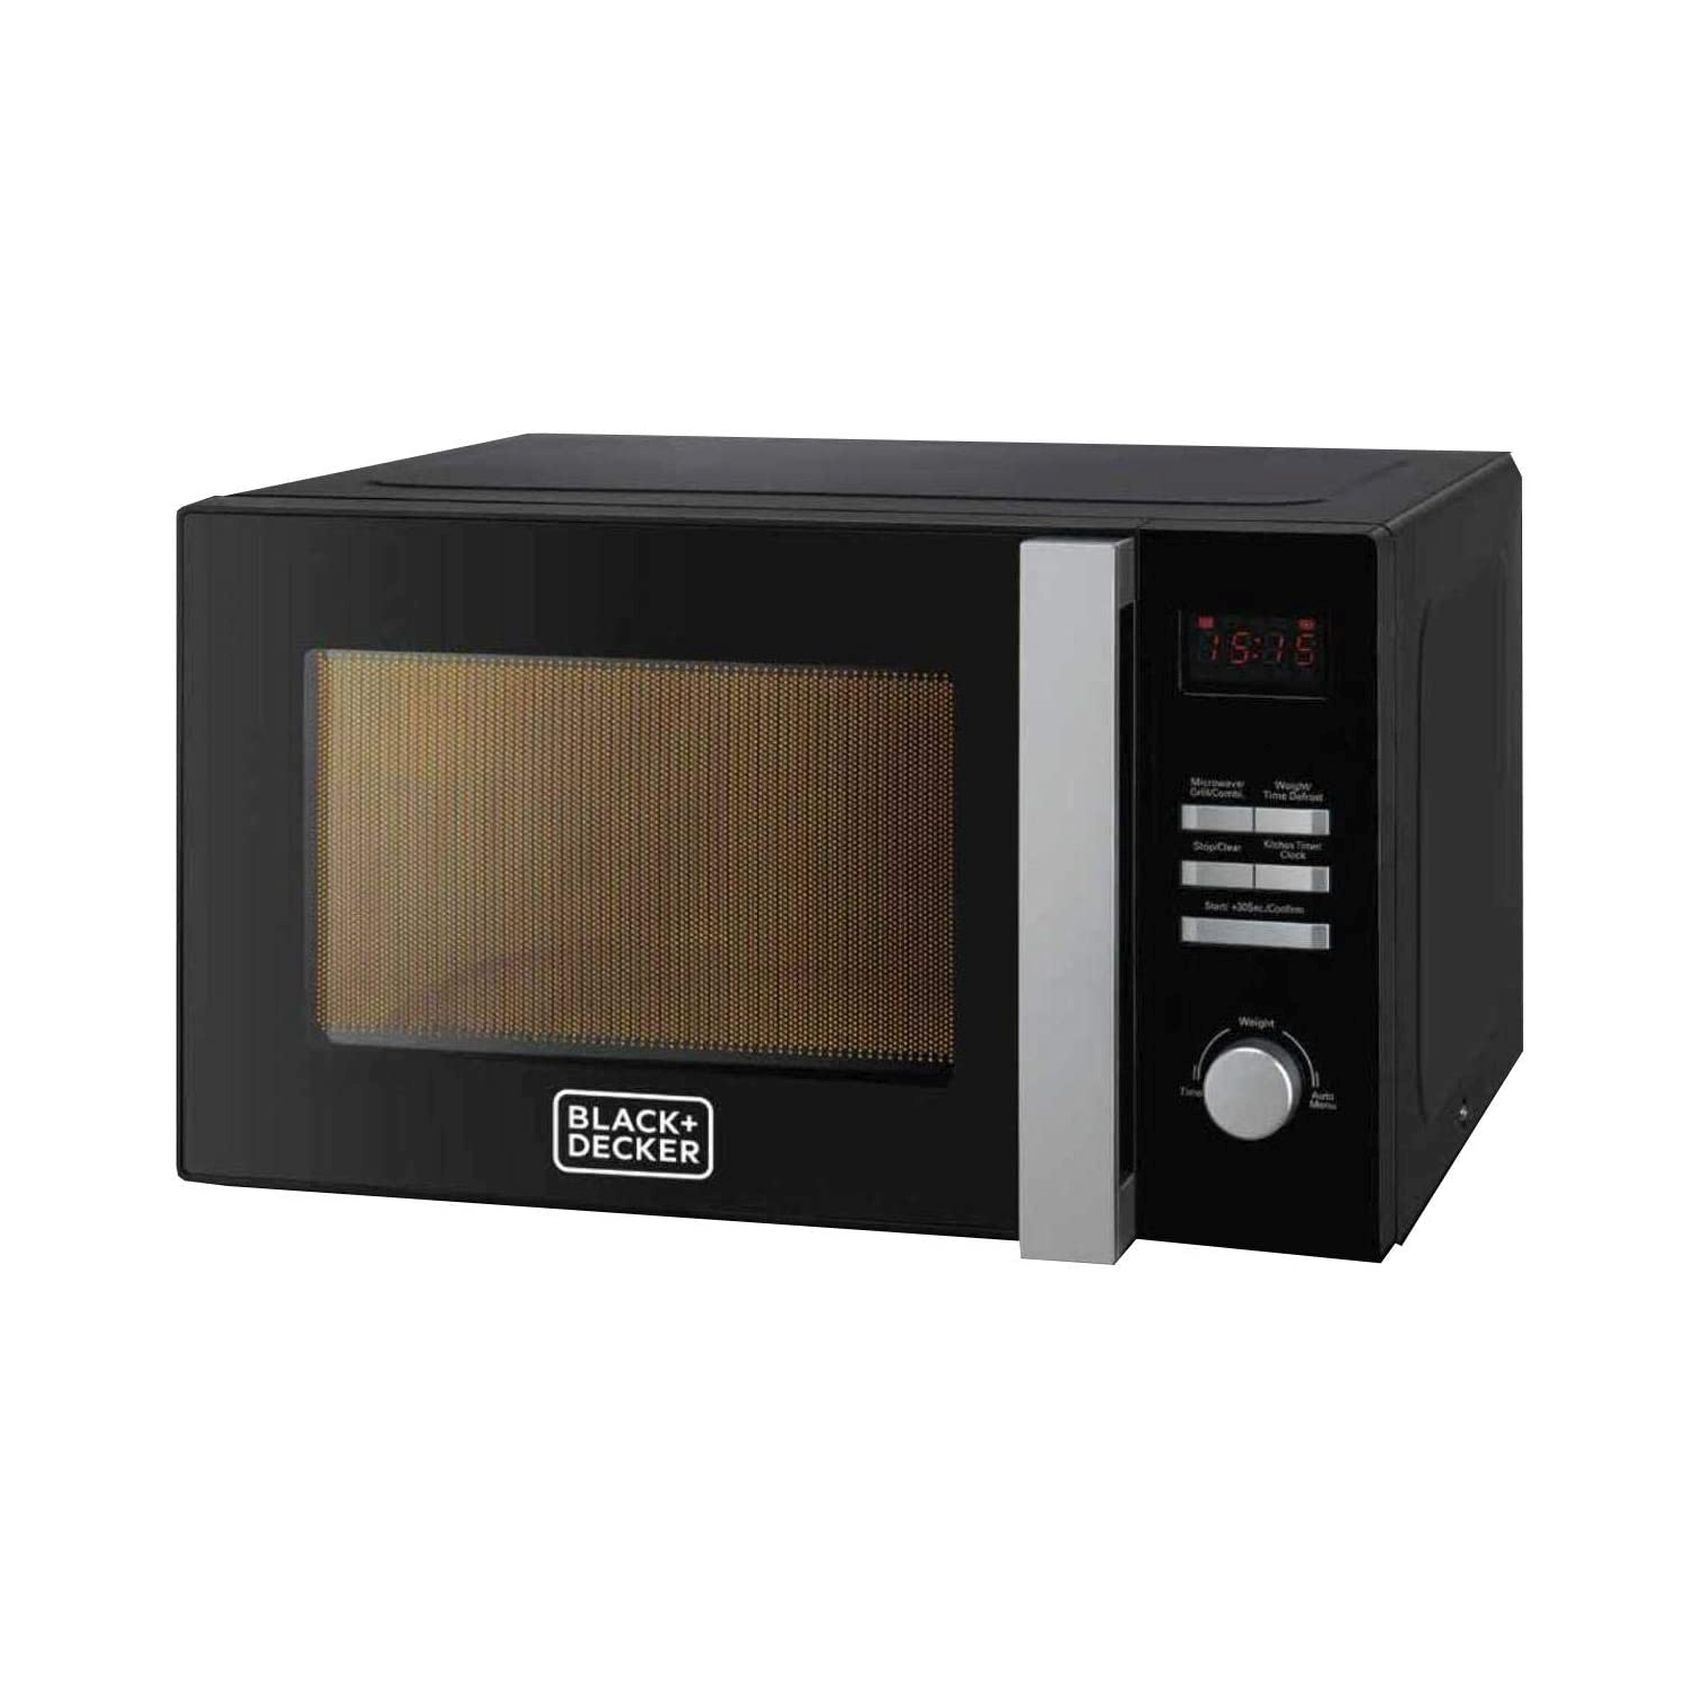 Buy Black+Decker Microwave Oven With Grill MZ2800PG-B5 - 28 Liters